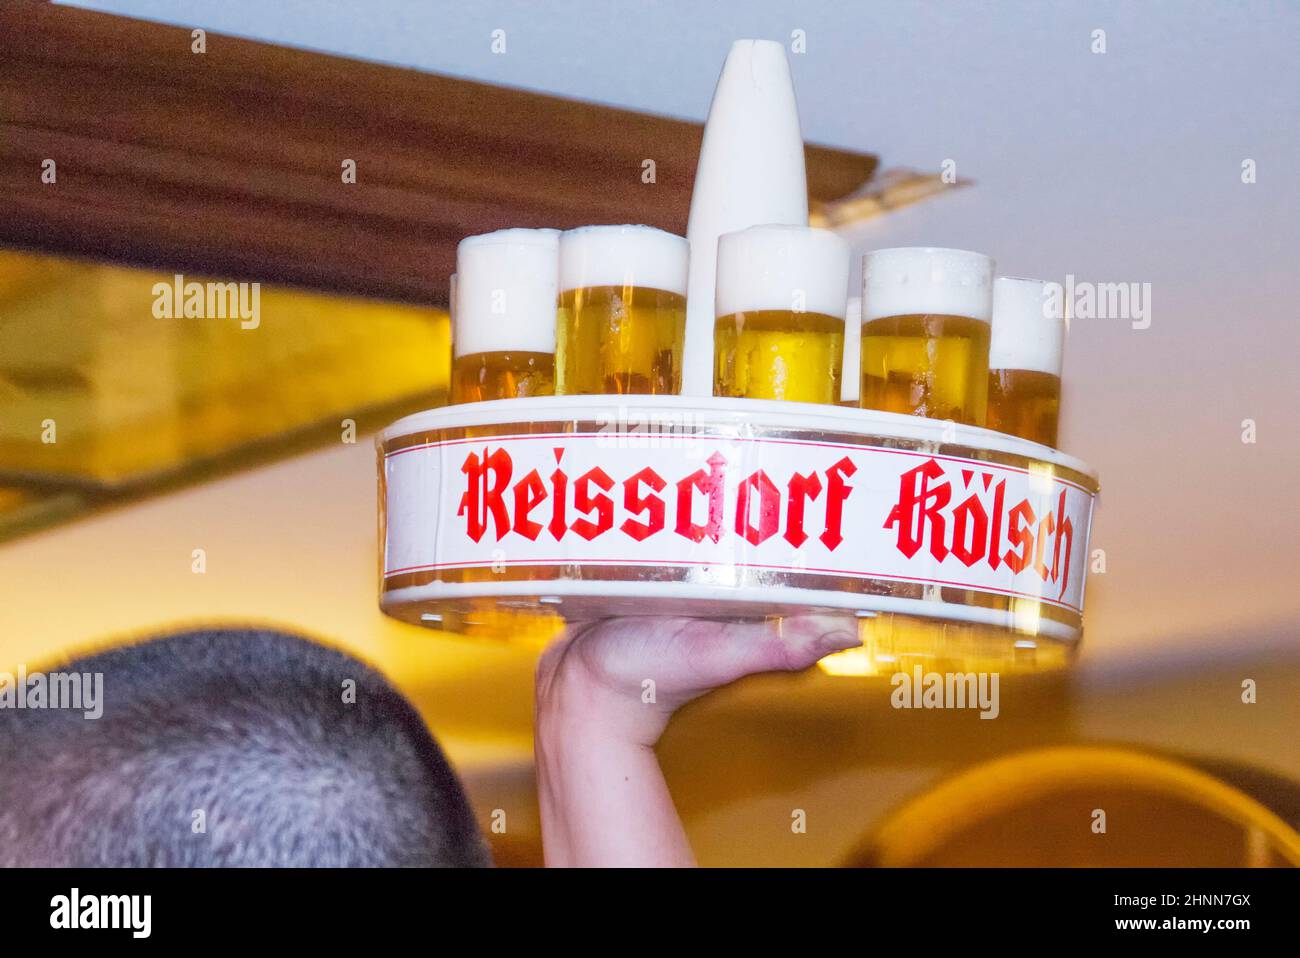 typical wreath as beer glass holder of the typical kolsch beer in cologne Stock Photo